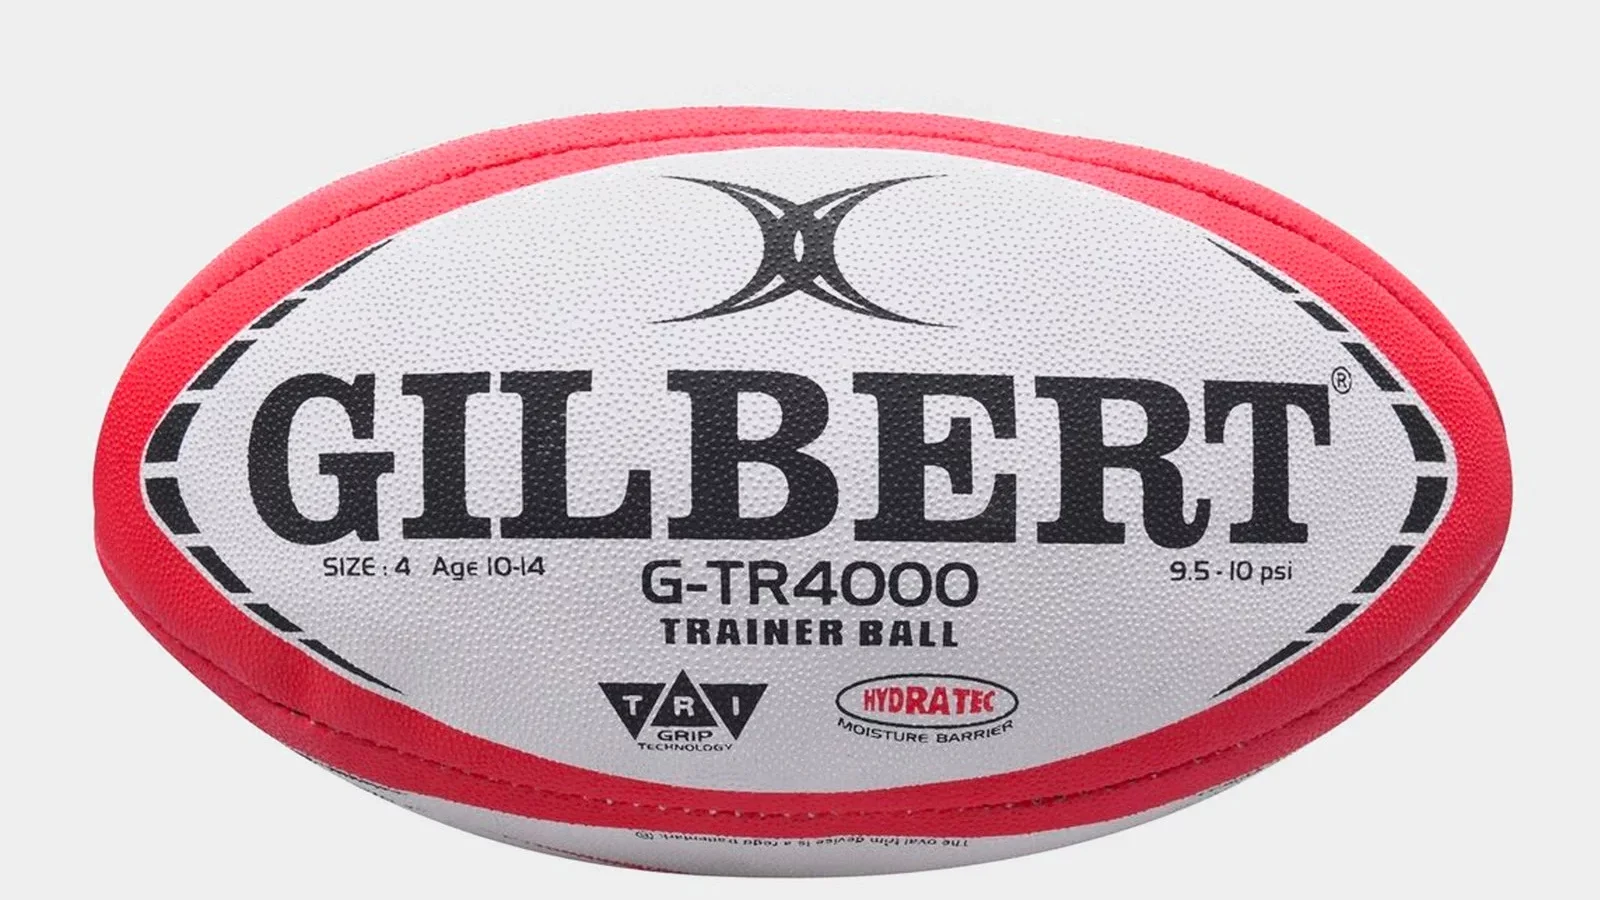 Rugby Training Ball by Gilbert. The G-TR4000 Trainer Ball. Available to purchase at Lovell Rugby.